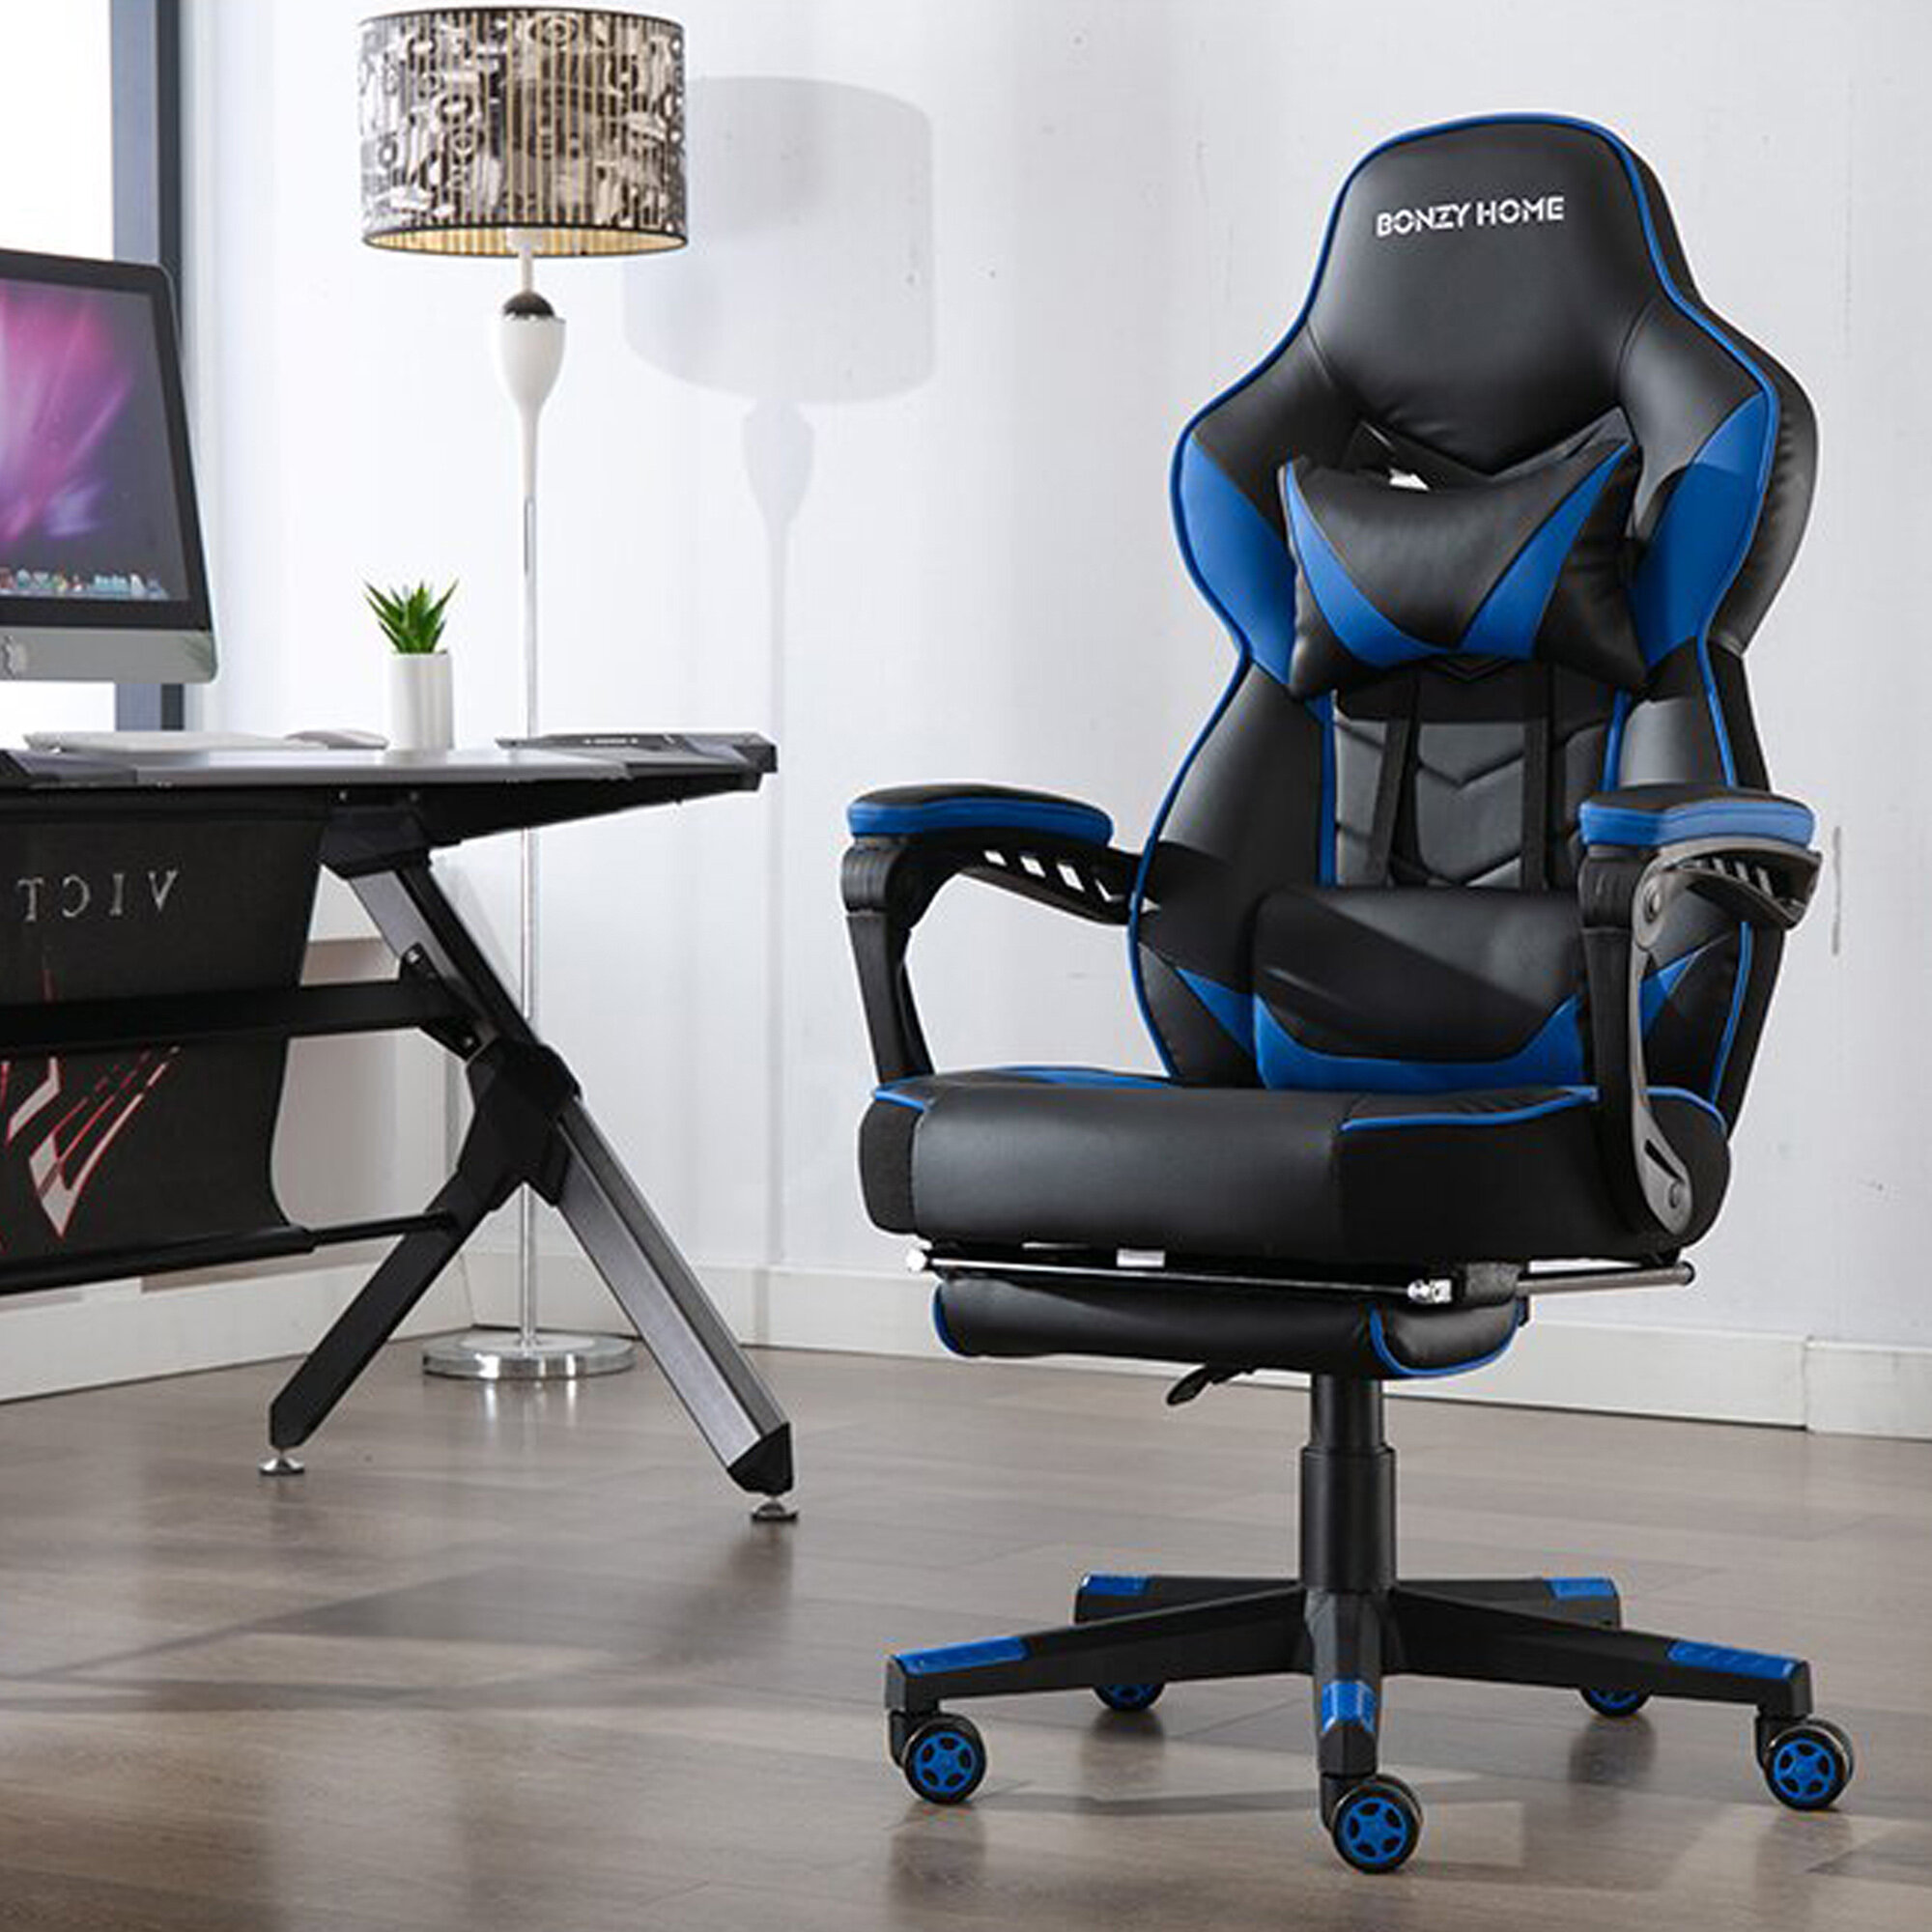 Ergonomic Racer Gaming Chair Office Computer Recliner Seat with Lumbar & Headset 